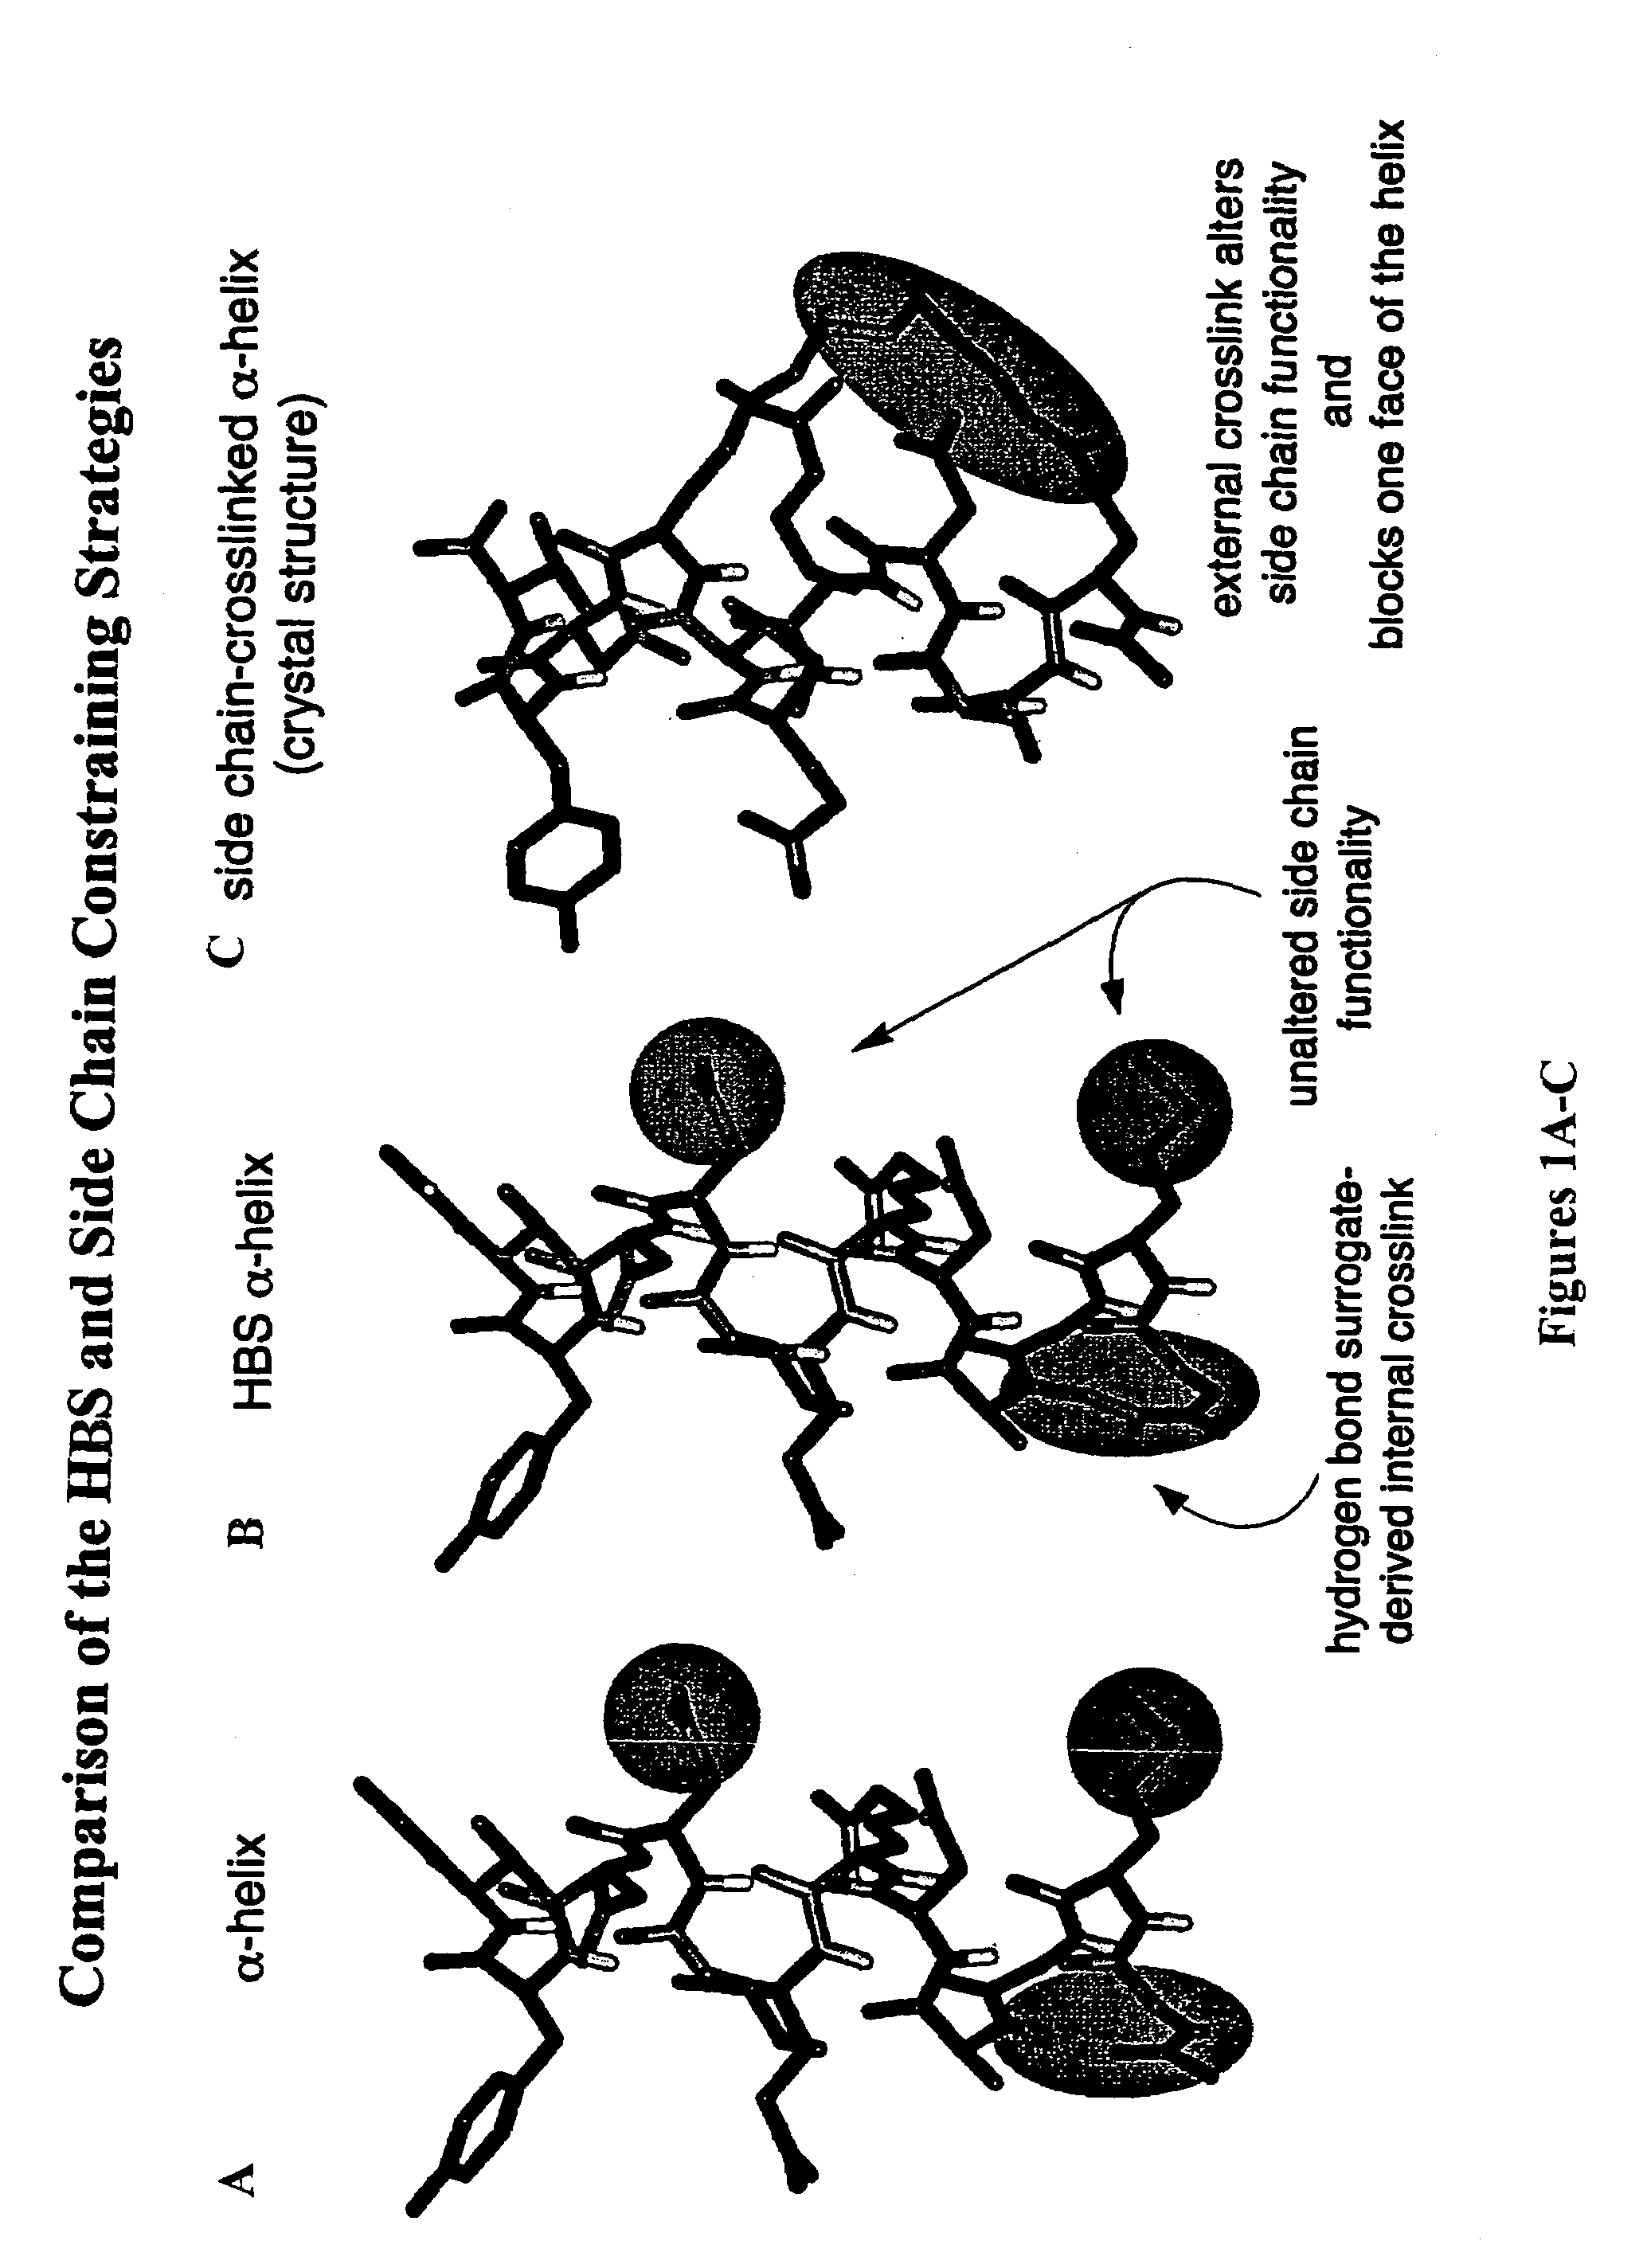 Methods for preparing internally constrained peptides and peptidomimetics